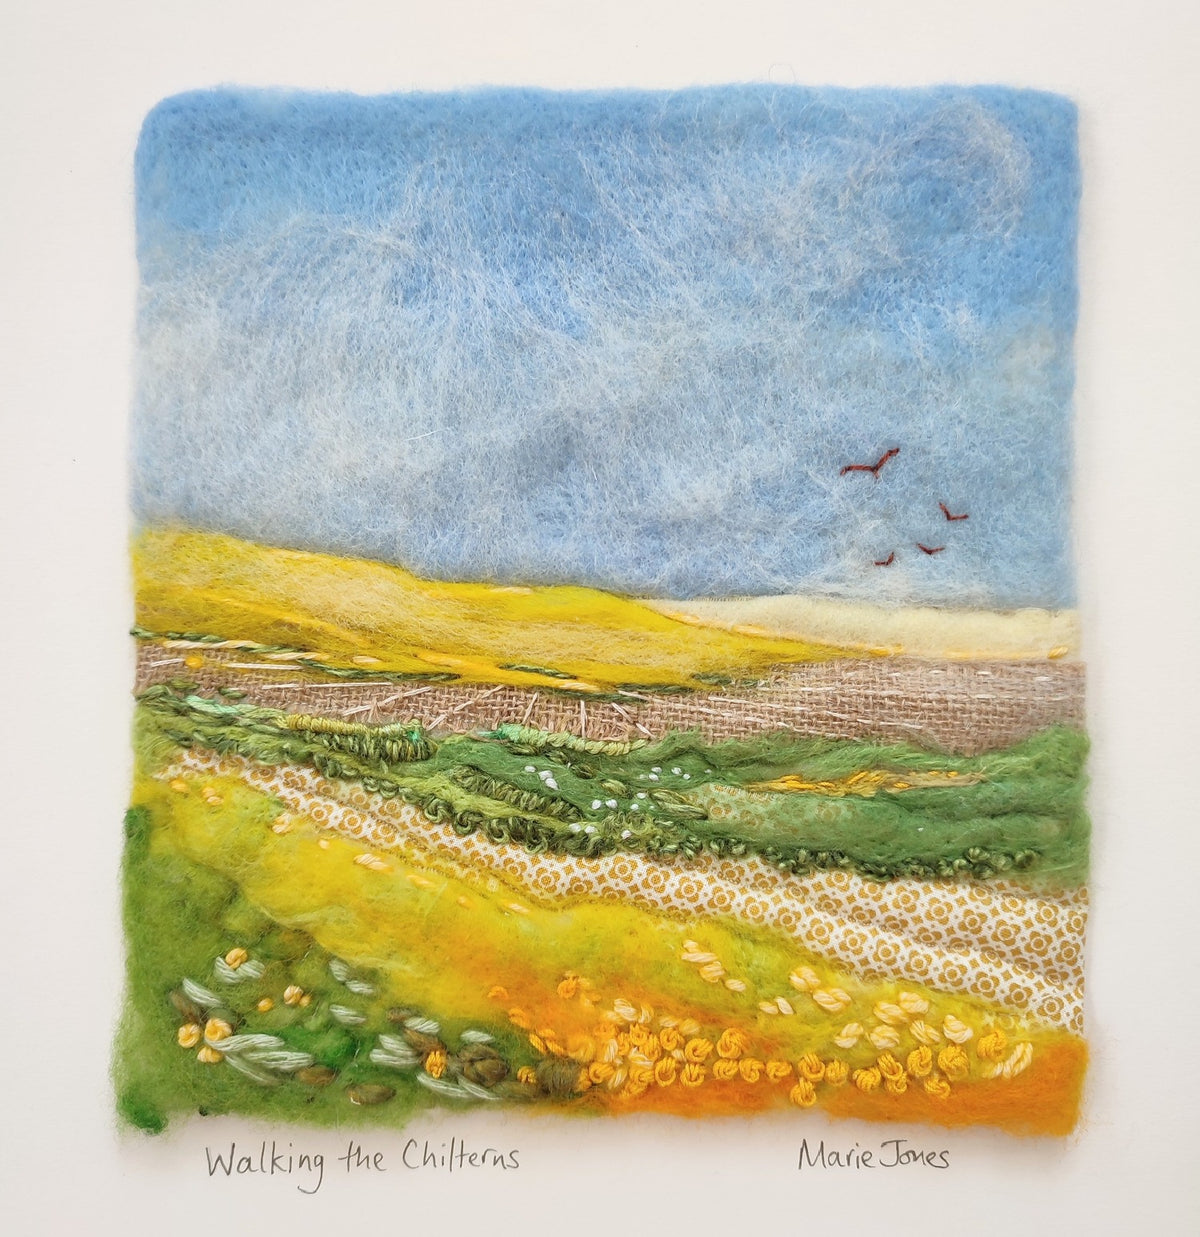 Walking the Chilterns by Marie Jones